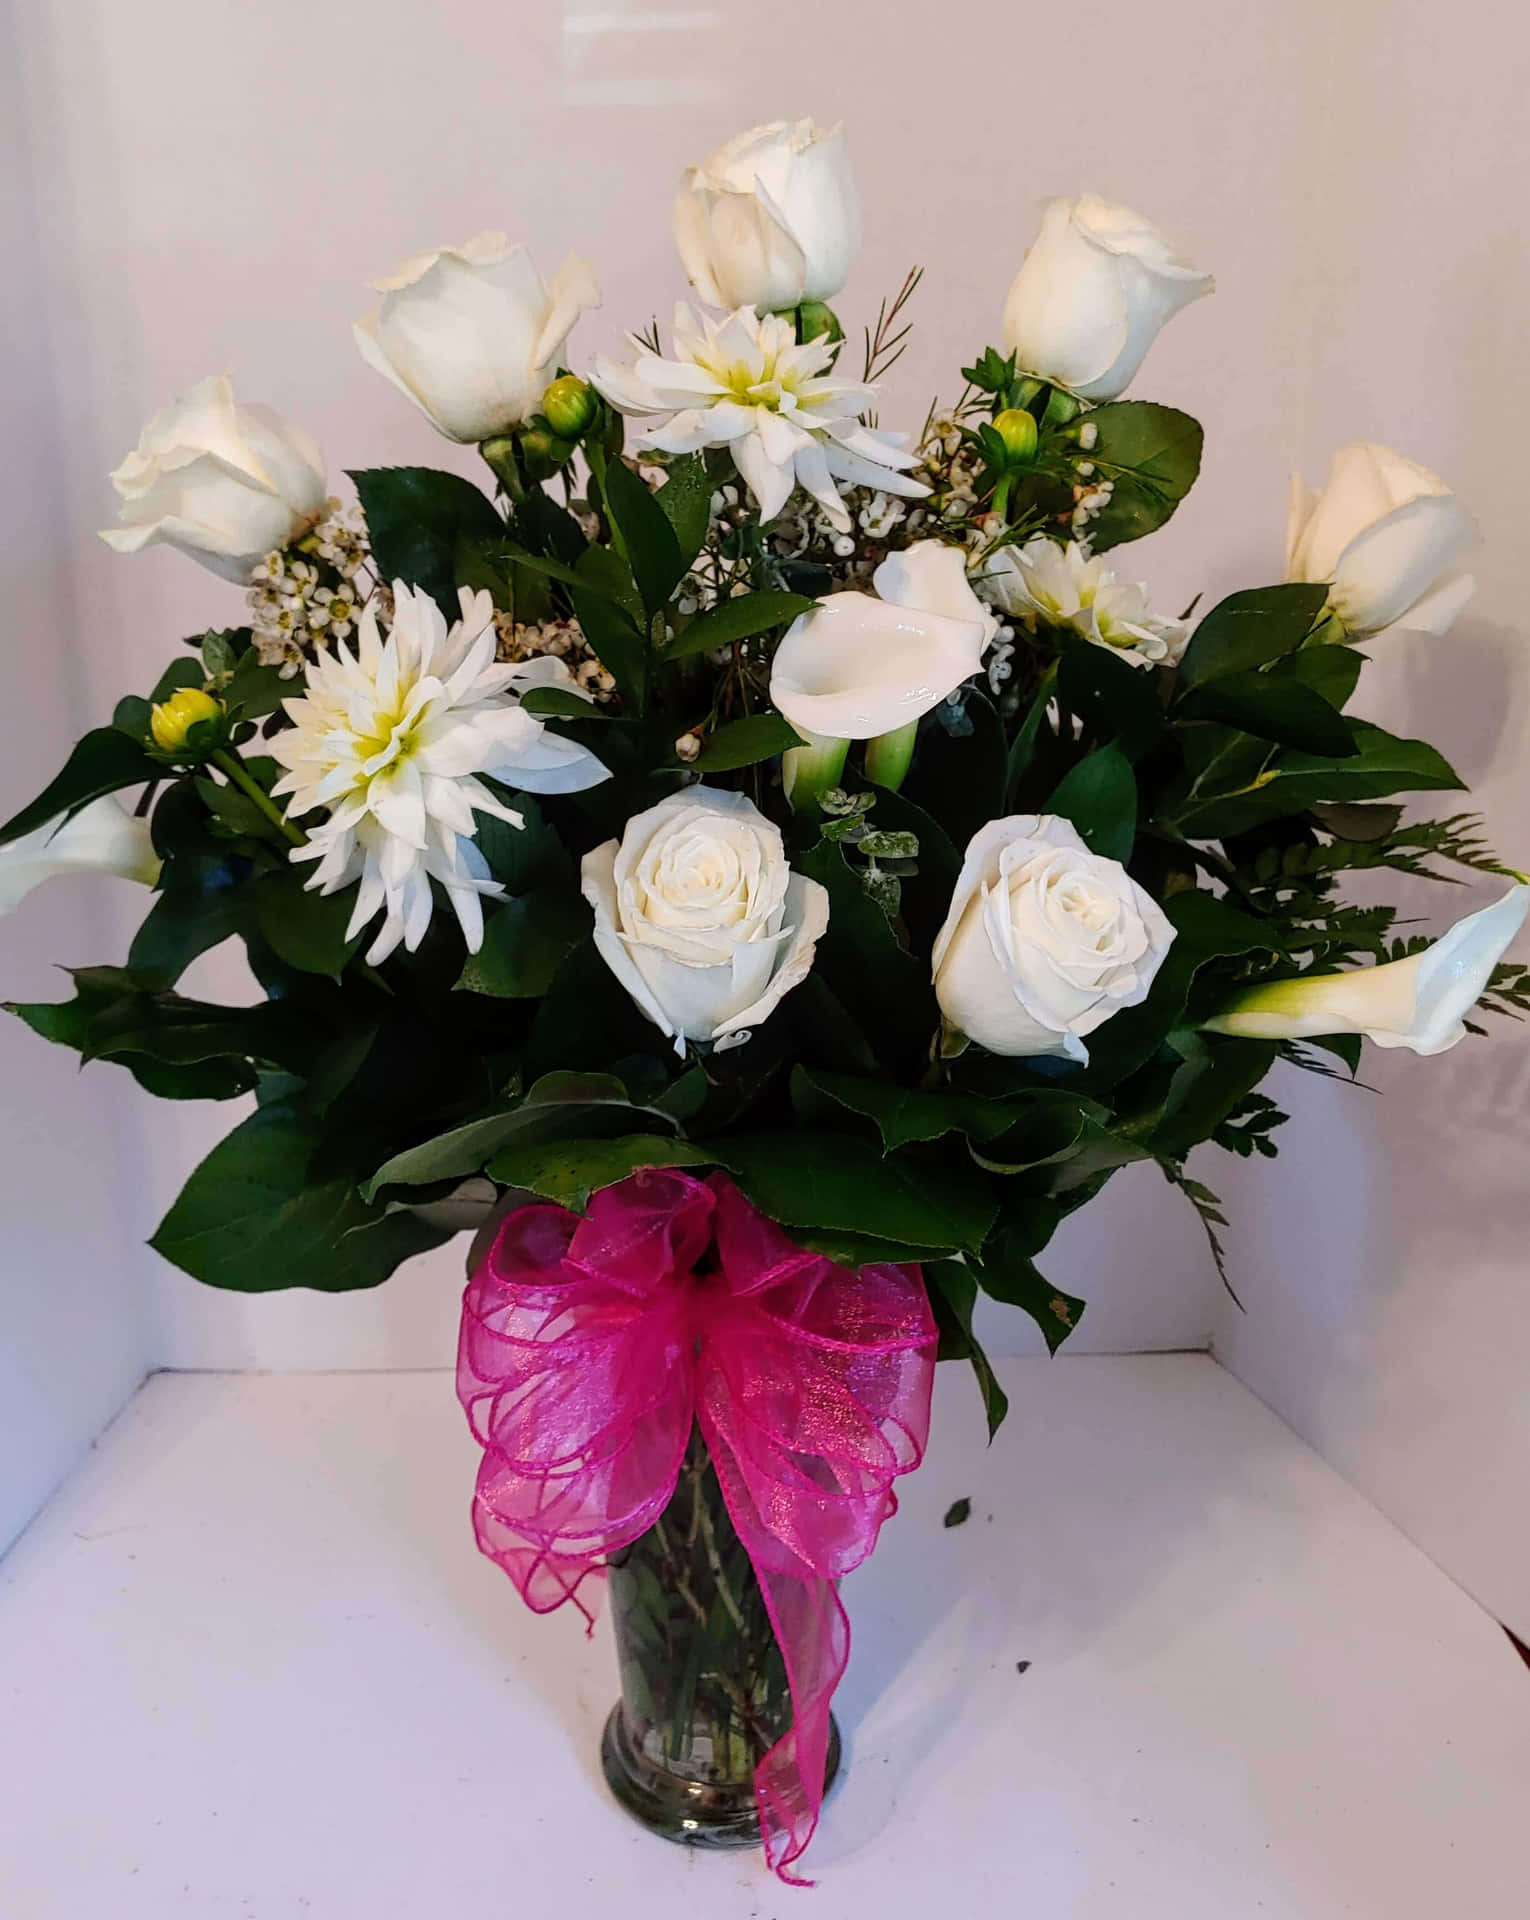 White Roses And Calla Lilies In A Vase